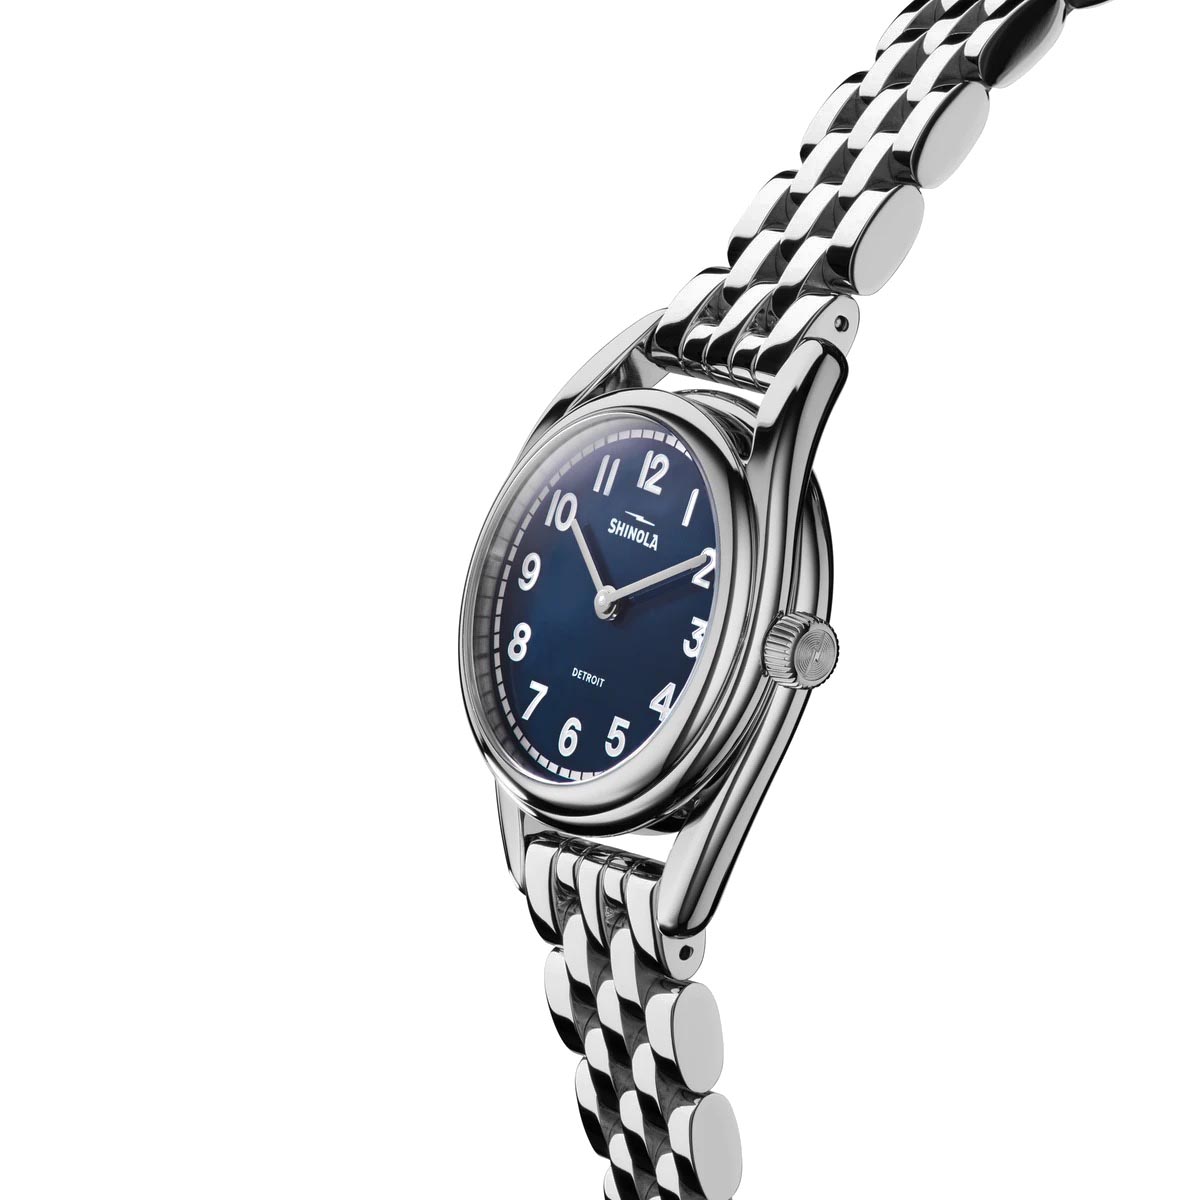 Shinola Derby Womens Watch with Blue Dial and Stainless Steel Bracelet (quartz movement)